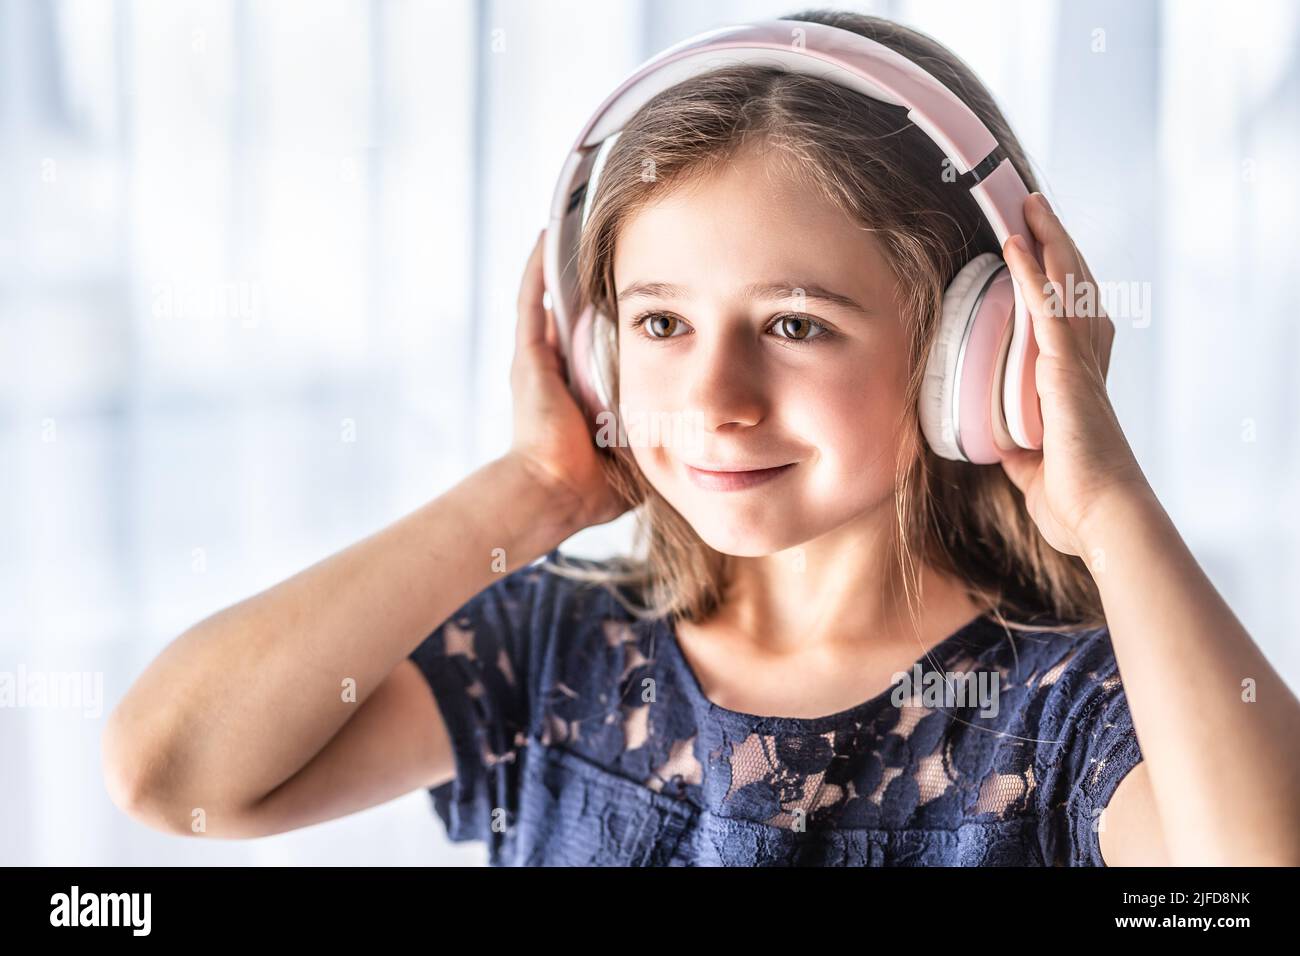 A small child listens to music through wireless headphones. Stock Photo